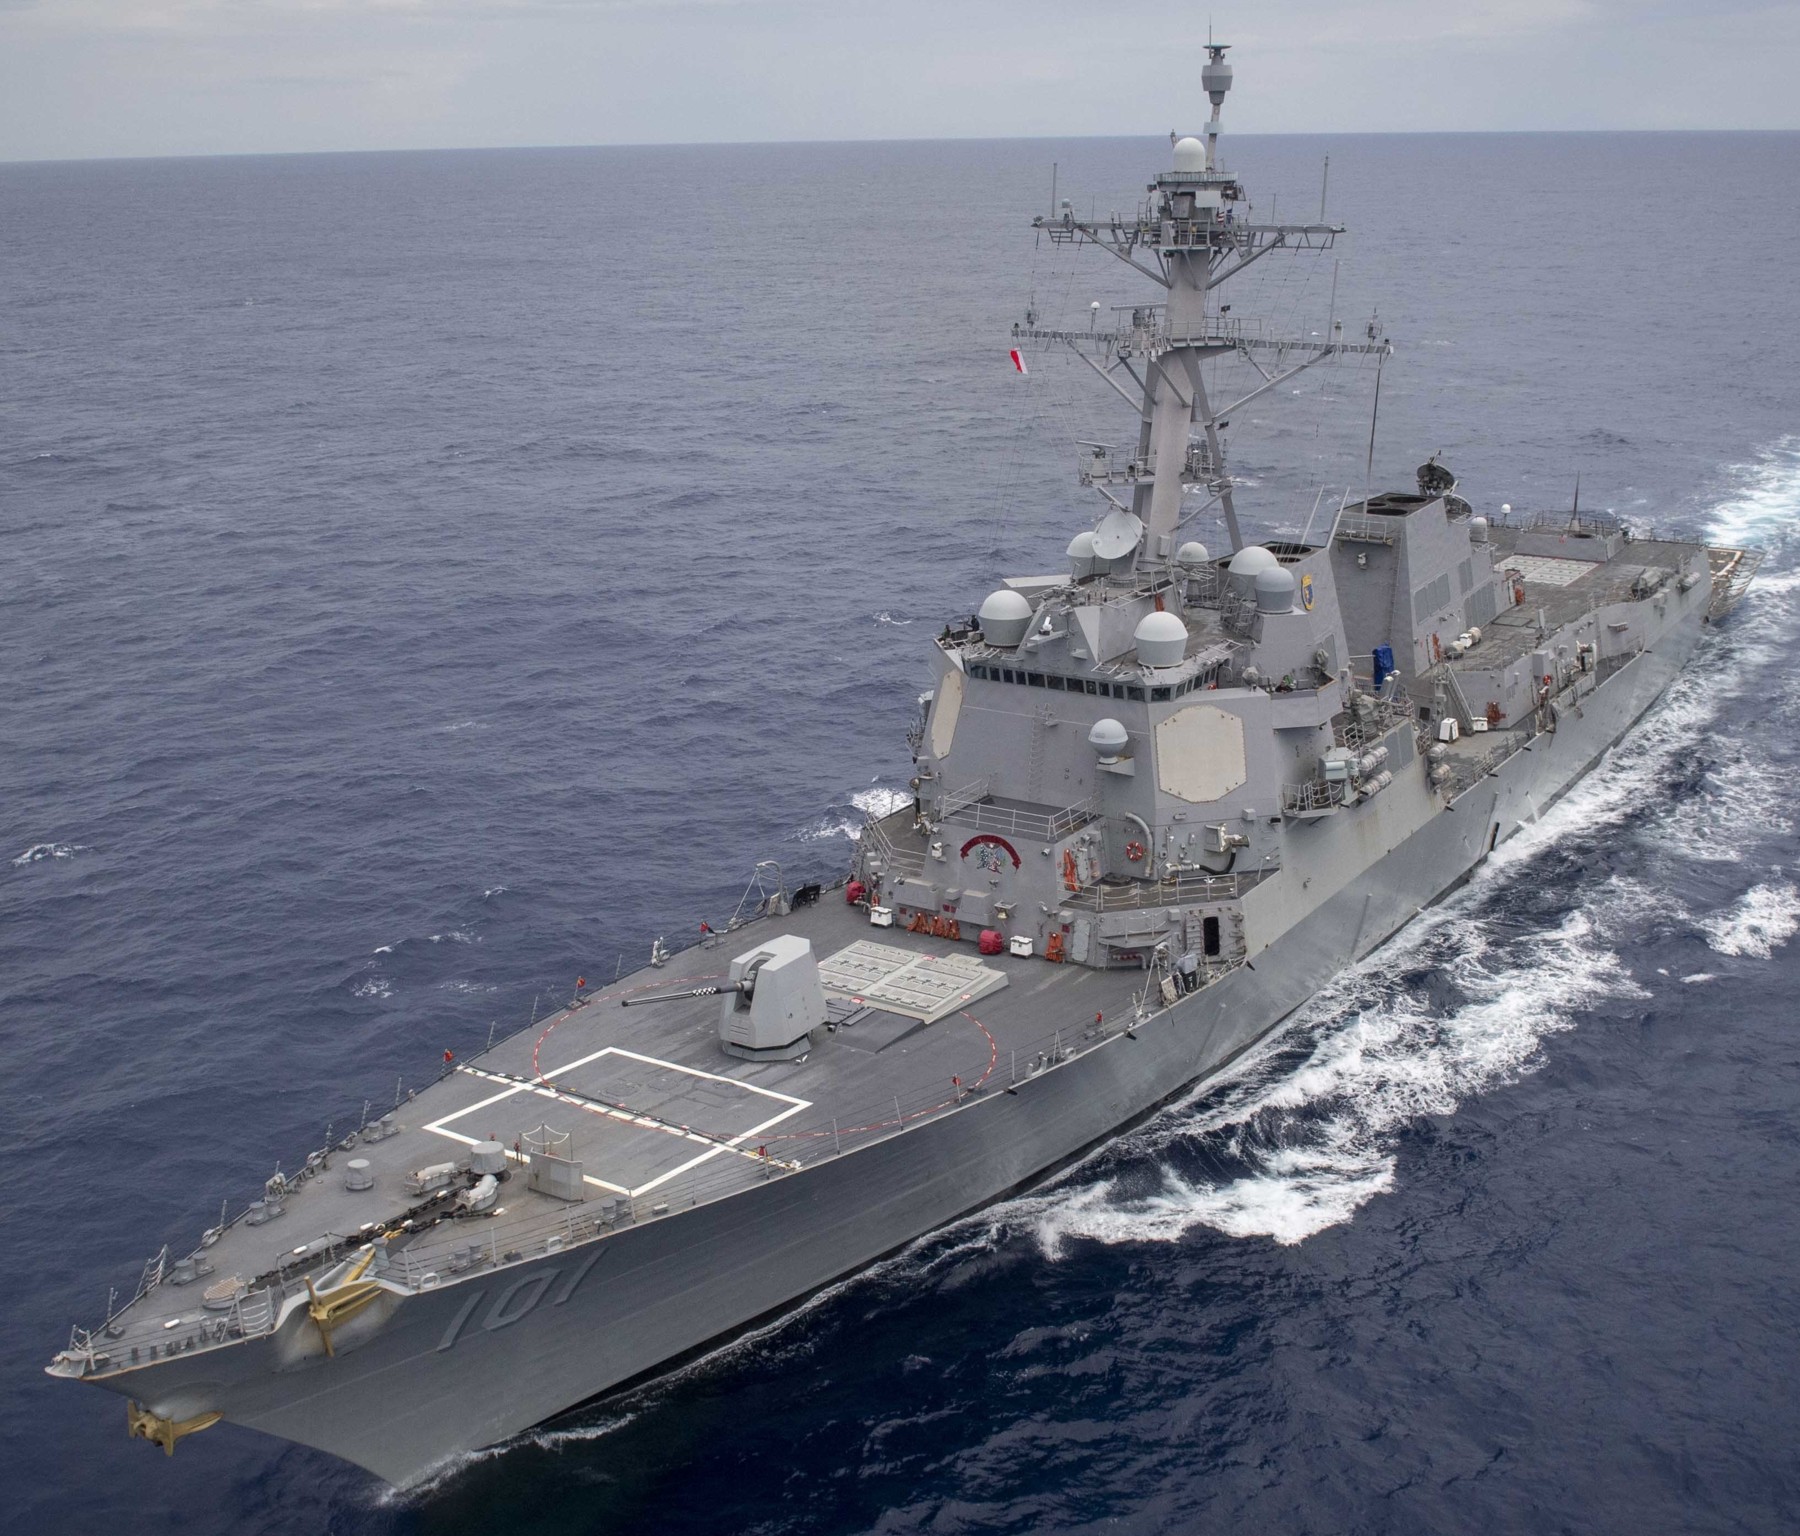 ddg-101 uss gridley arleigh burke class guided missile destroyer aegis us navy 61